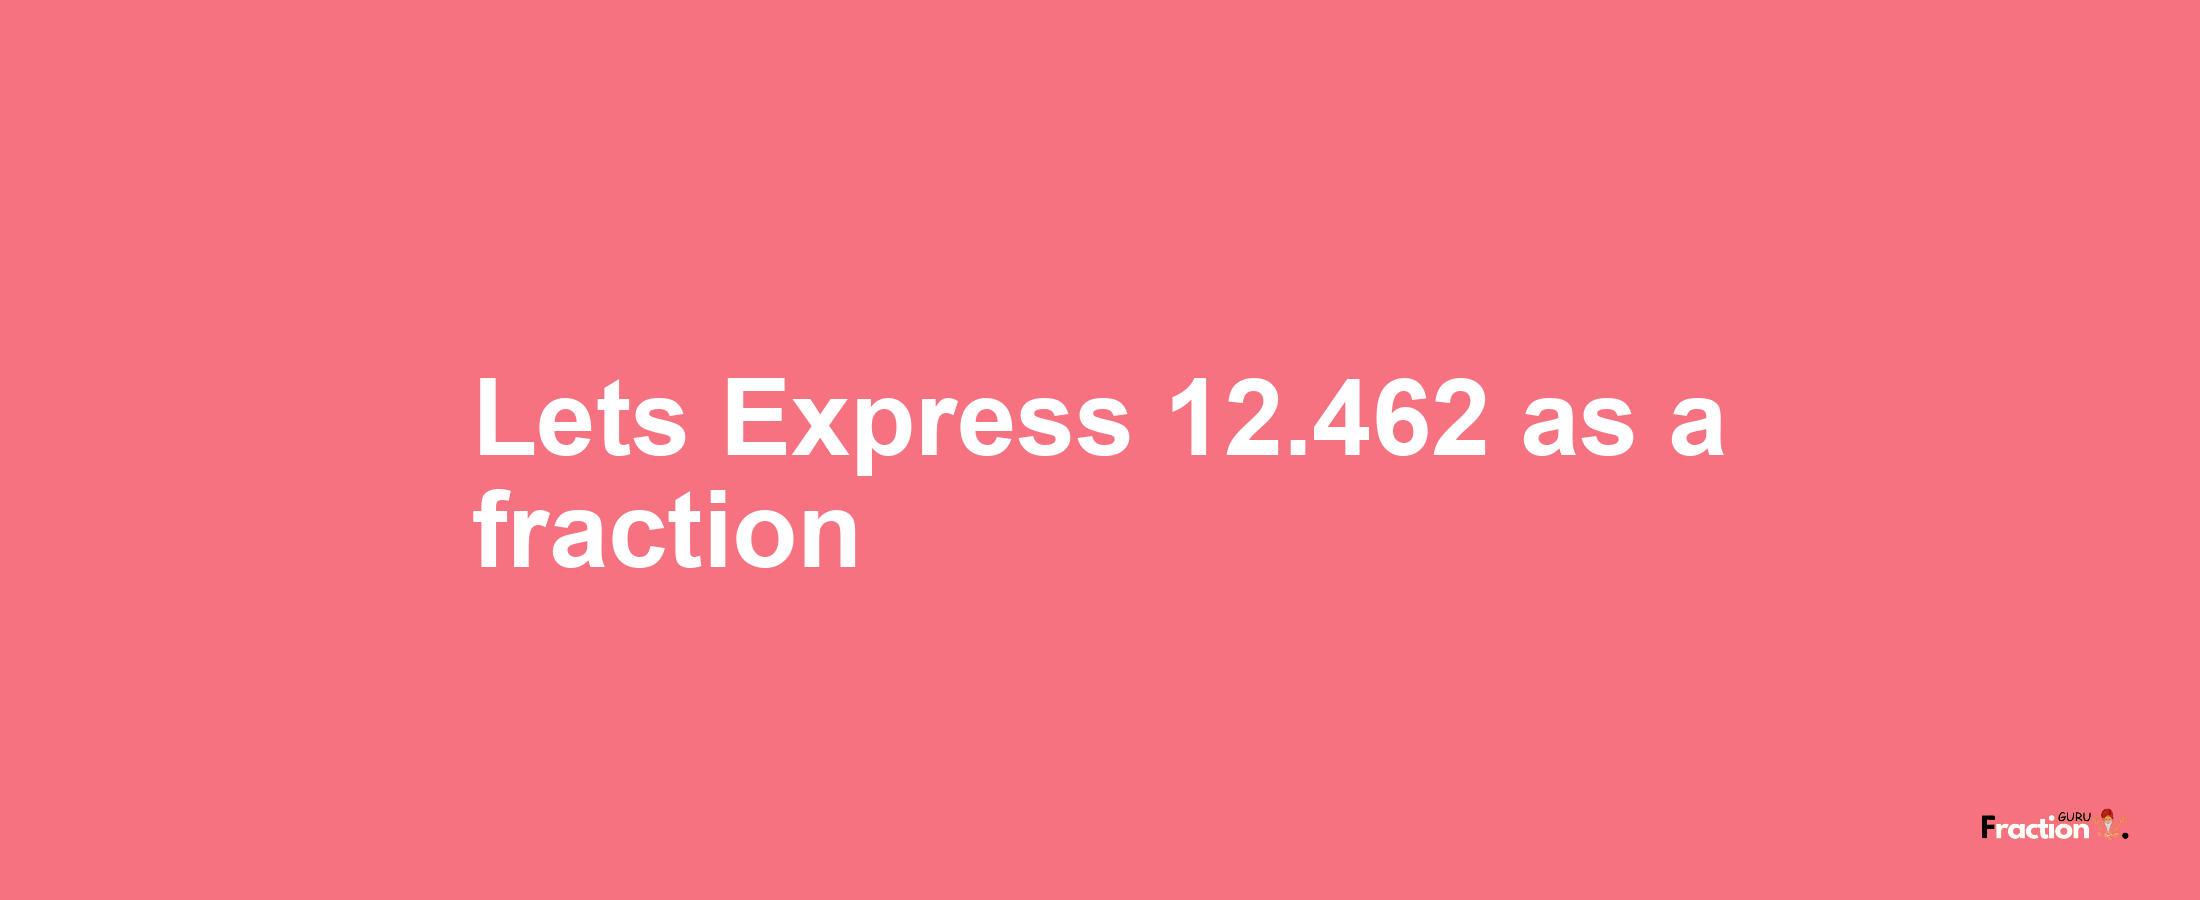 Lets Express 12.462 as afraction